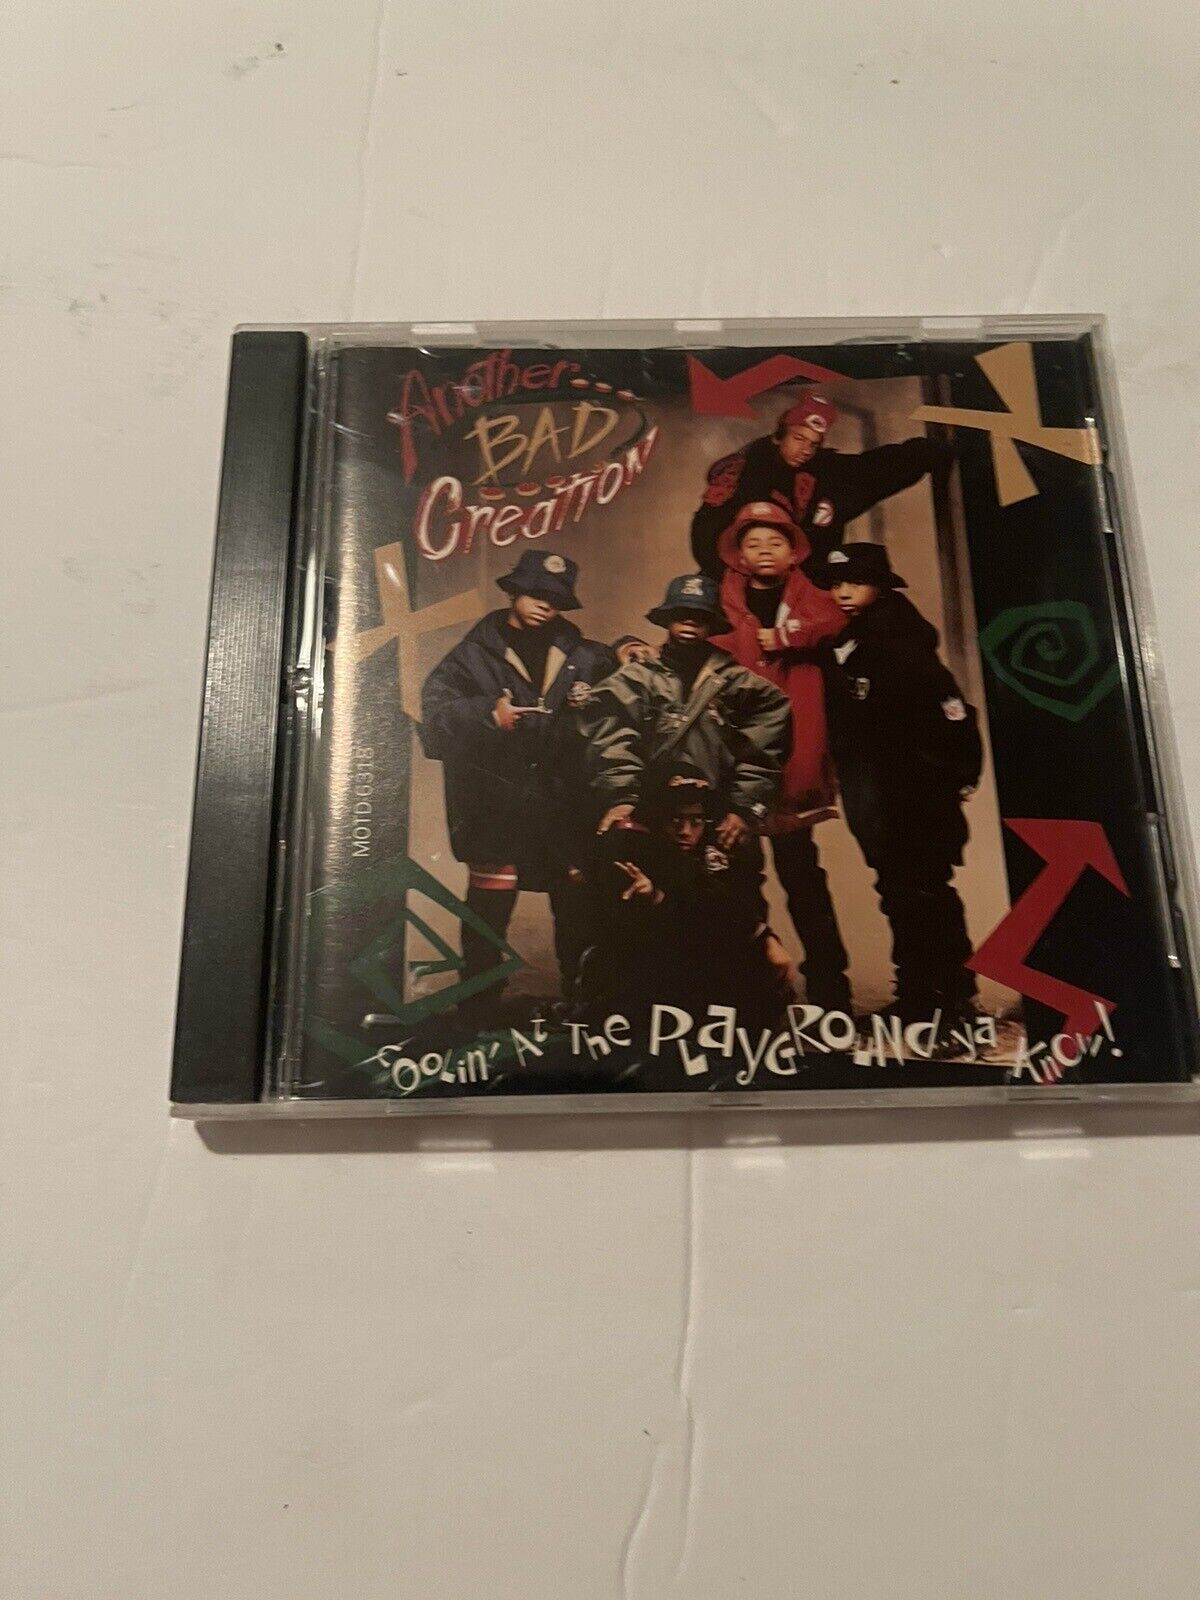 Another Bad Creation - Coolin\' At The Playground Ya\' Know CD